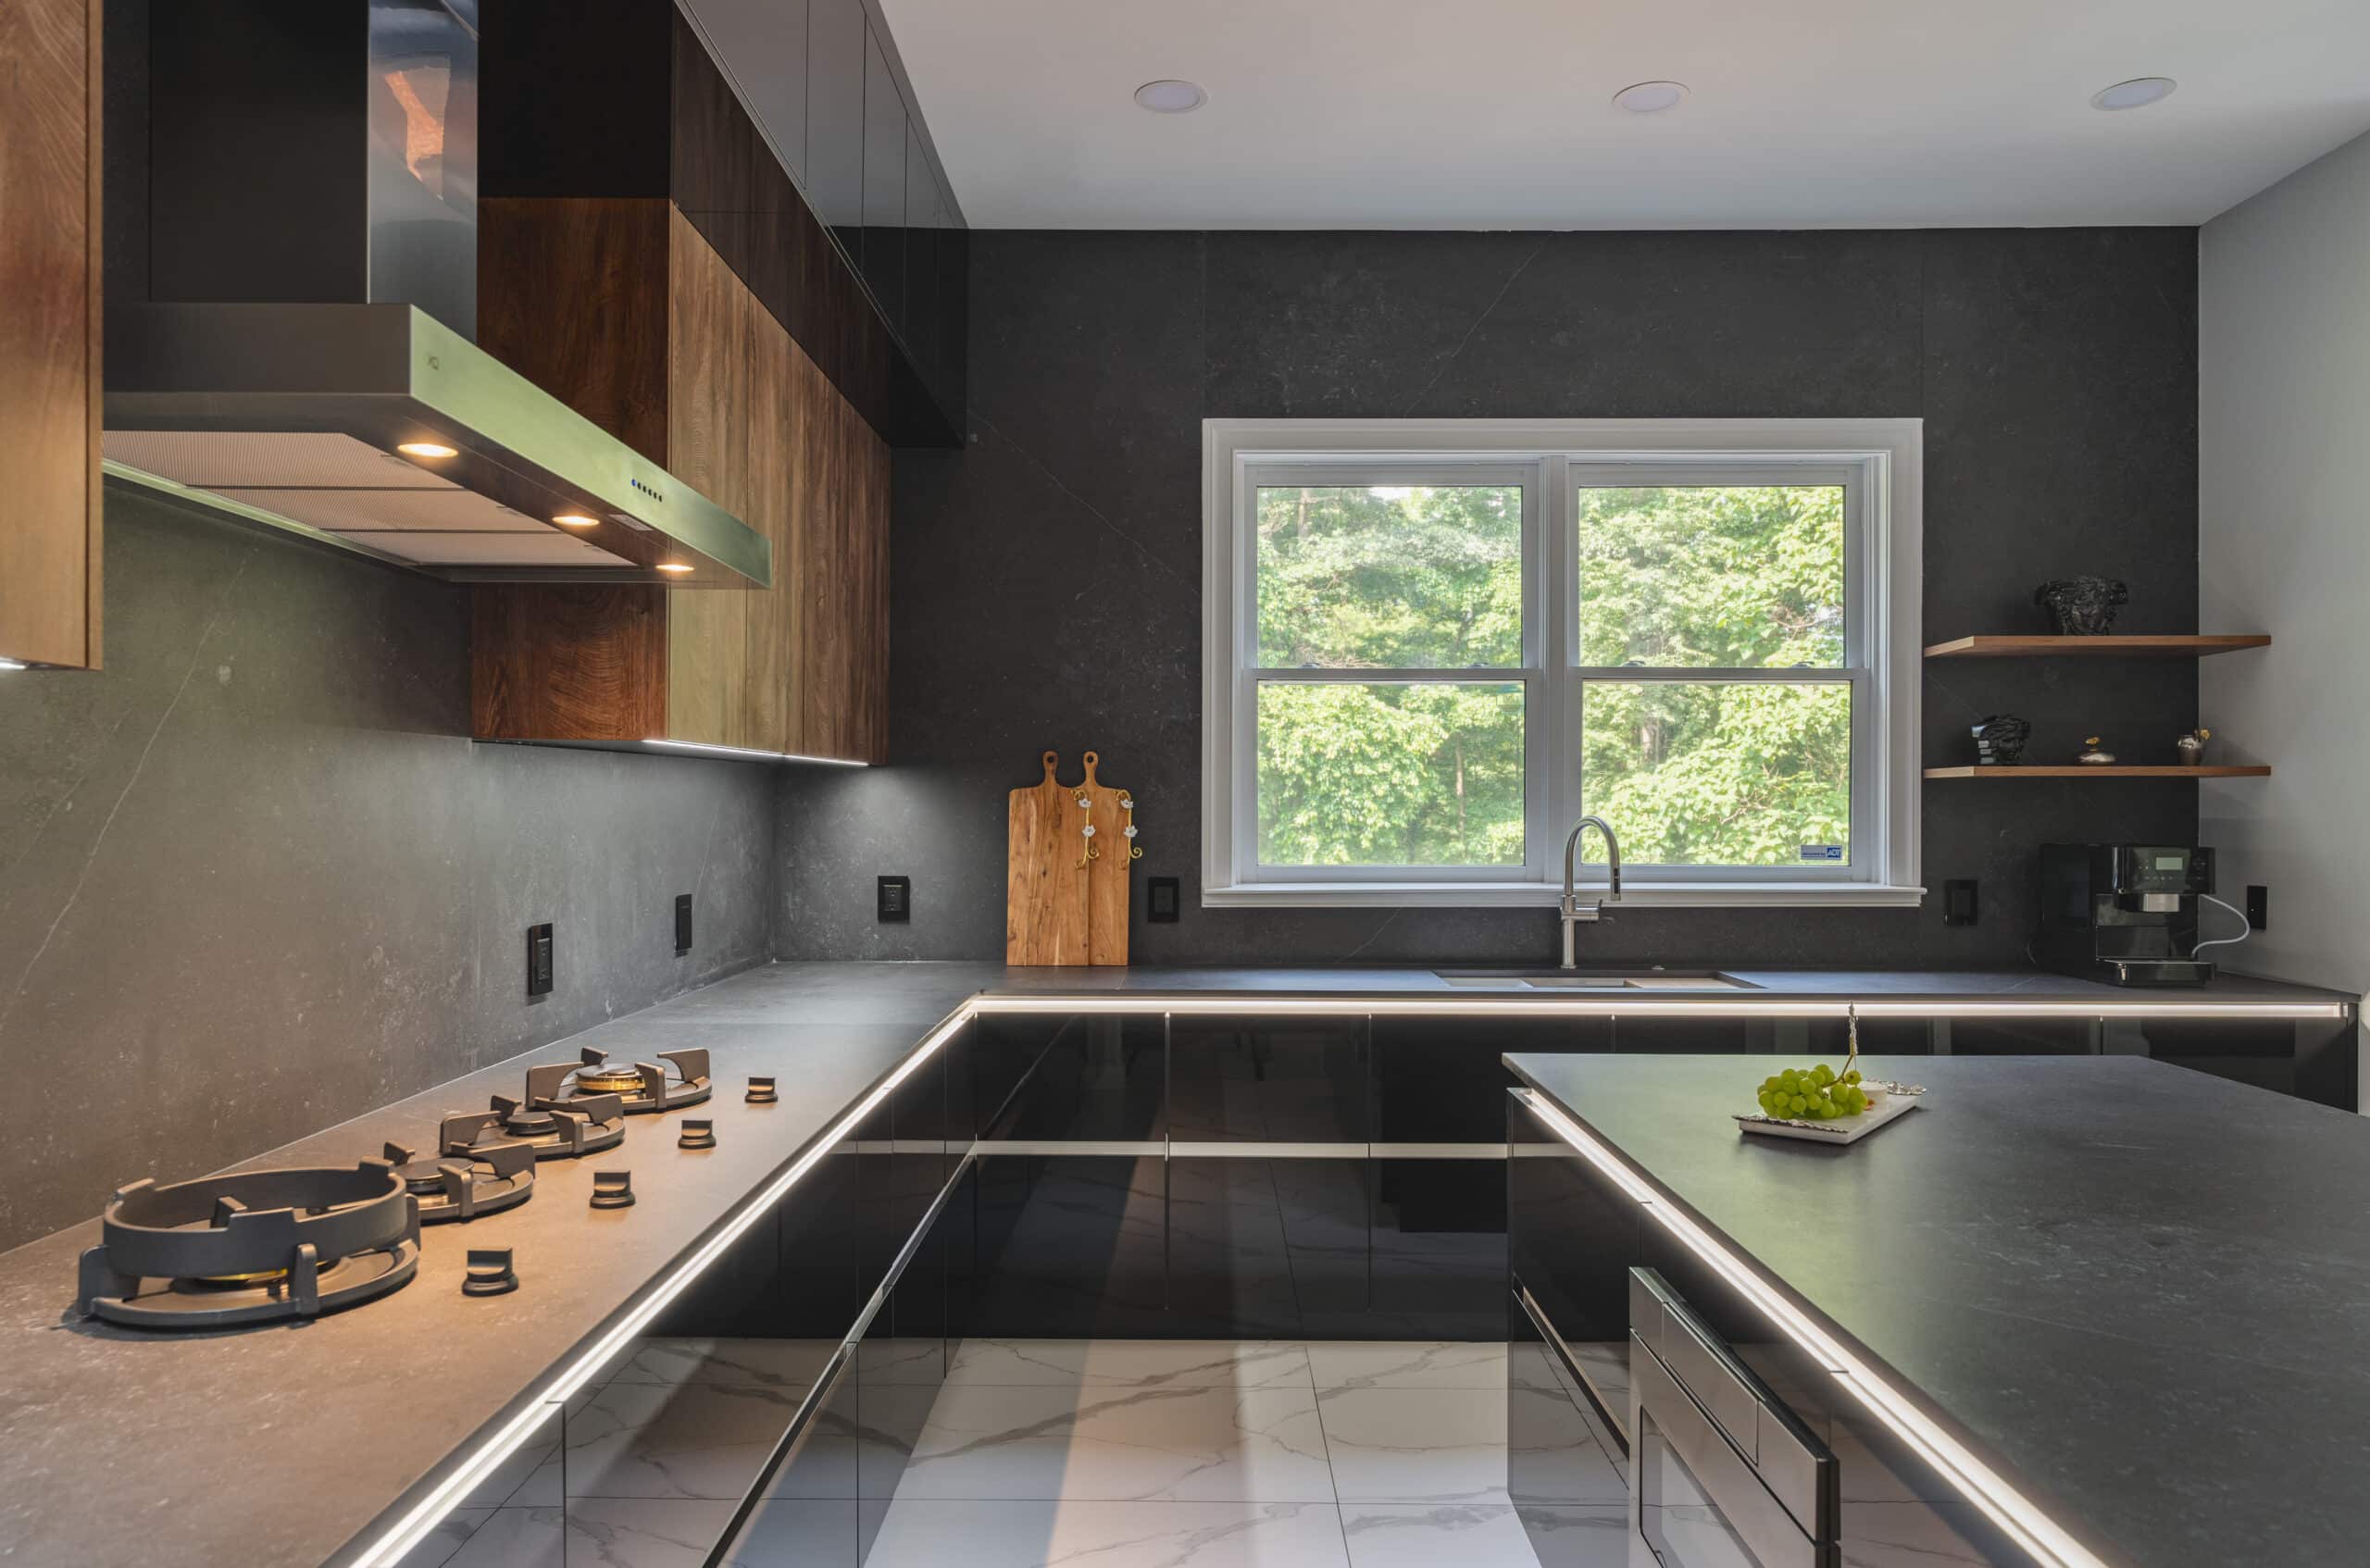 A contemporary kitchen featuring sleek black countertops and elegant wooden cabinets